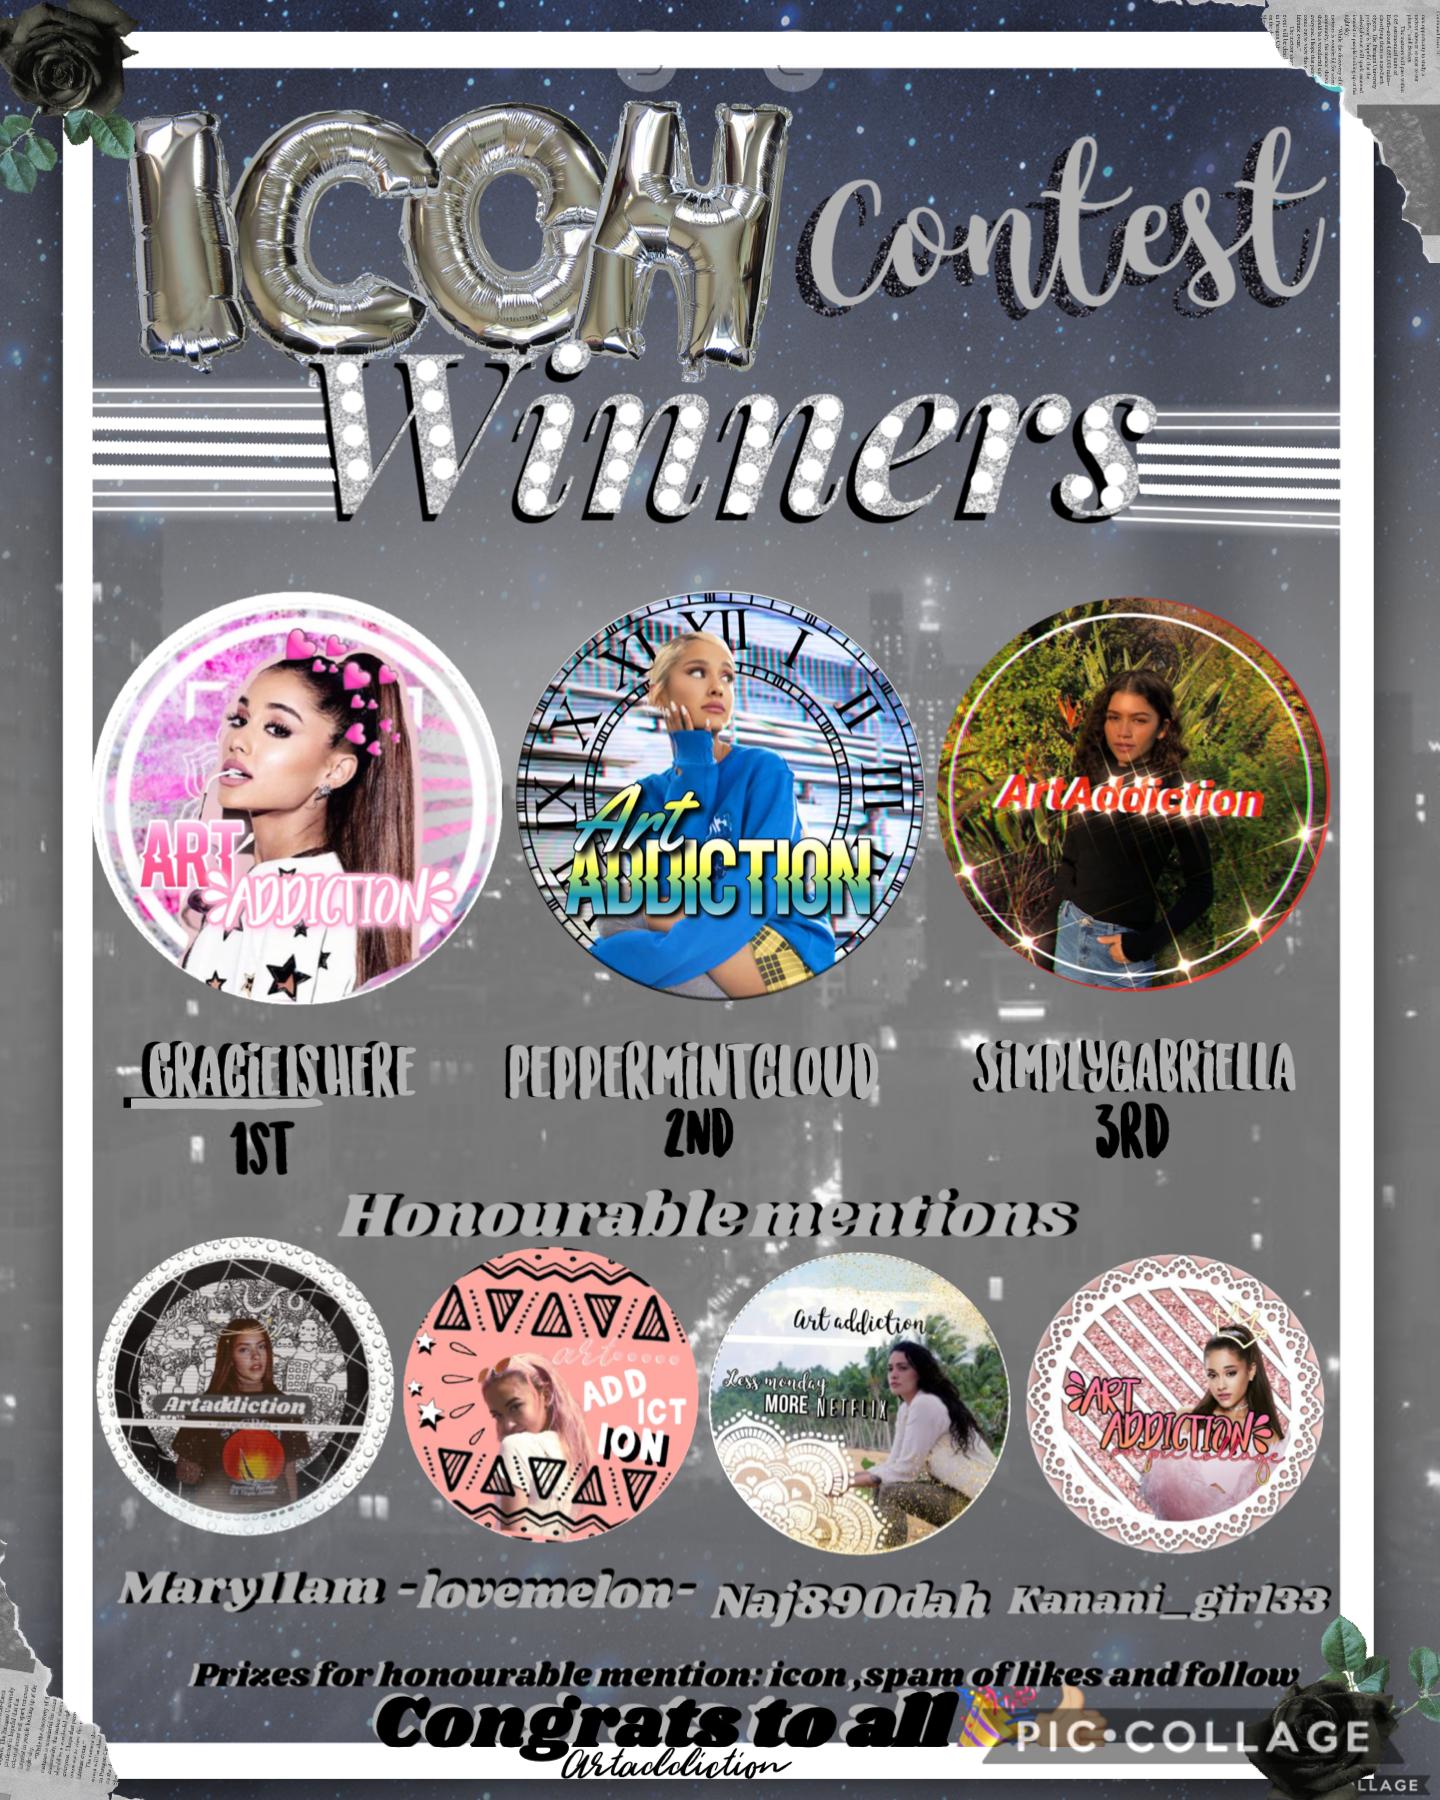 Congrats to all amazing talented collagers , prizes given soon and prizes in remix of icon contest 😘❤️👍🏼🎉